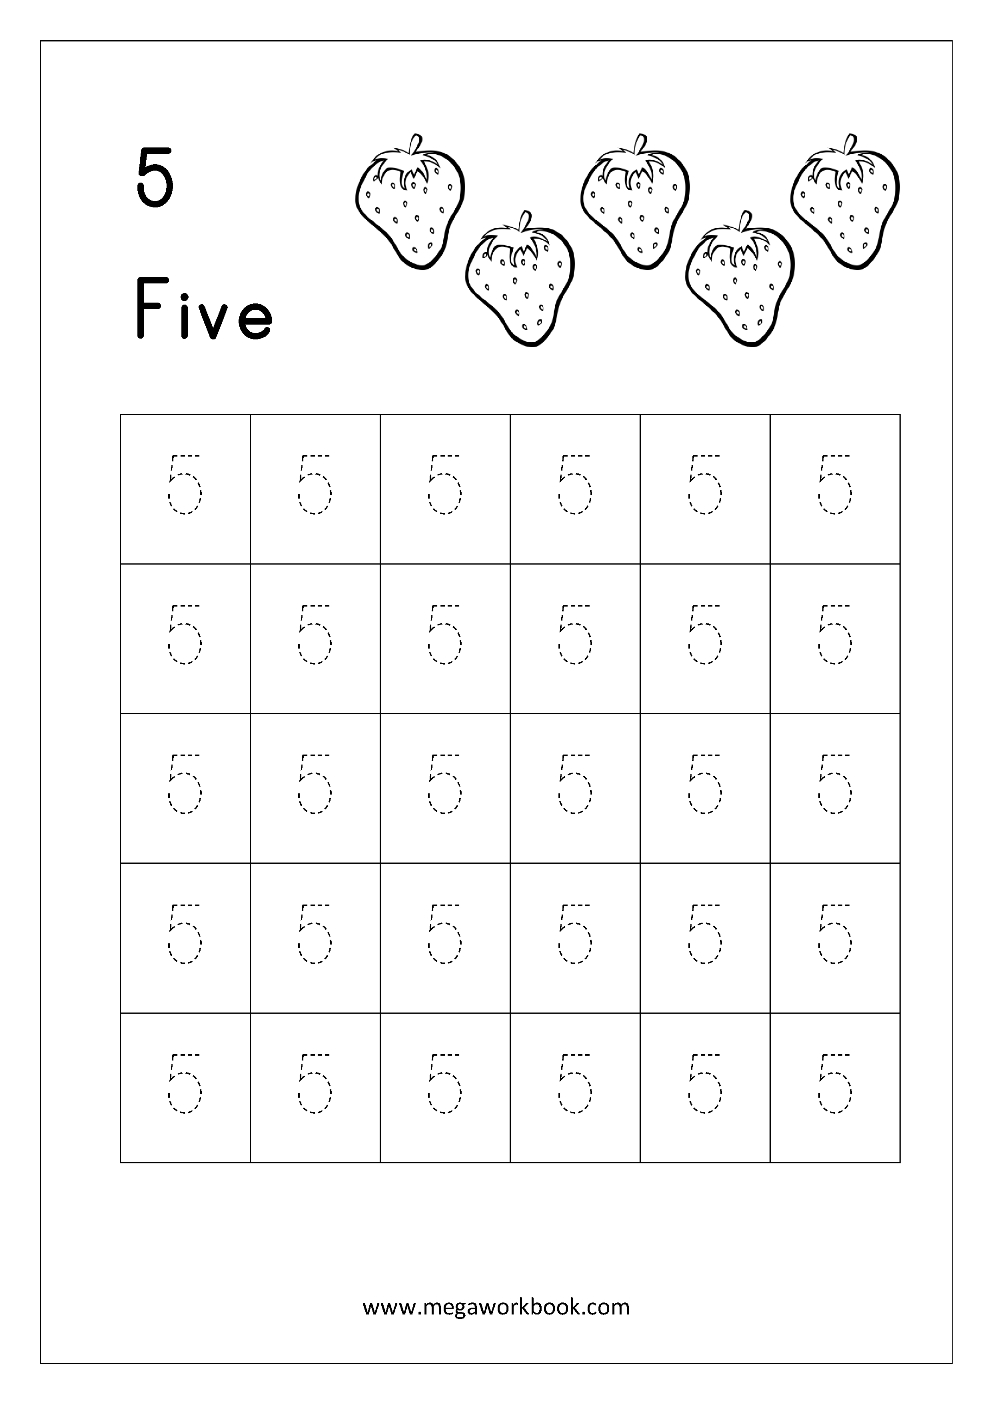 Free Printable Number Tracing And Writing (1-10) Worksheets - Number | Printable Number Tracing Worksheets